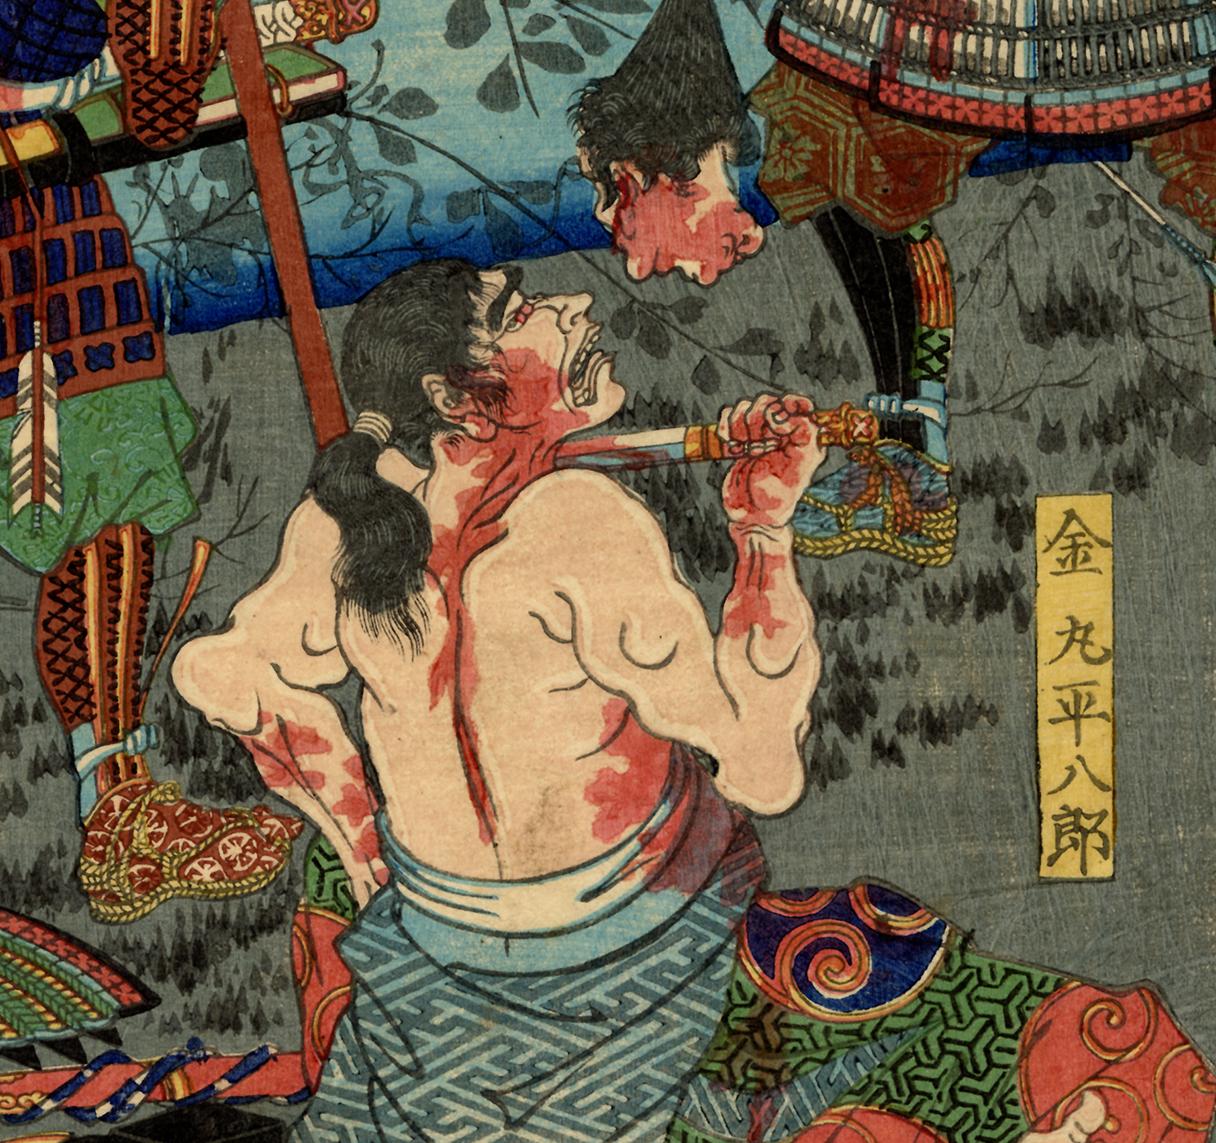 Death in Battle by Suicide - Edo Print by Taiso Yoshitoshi